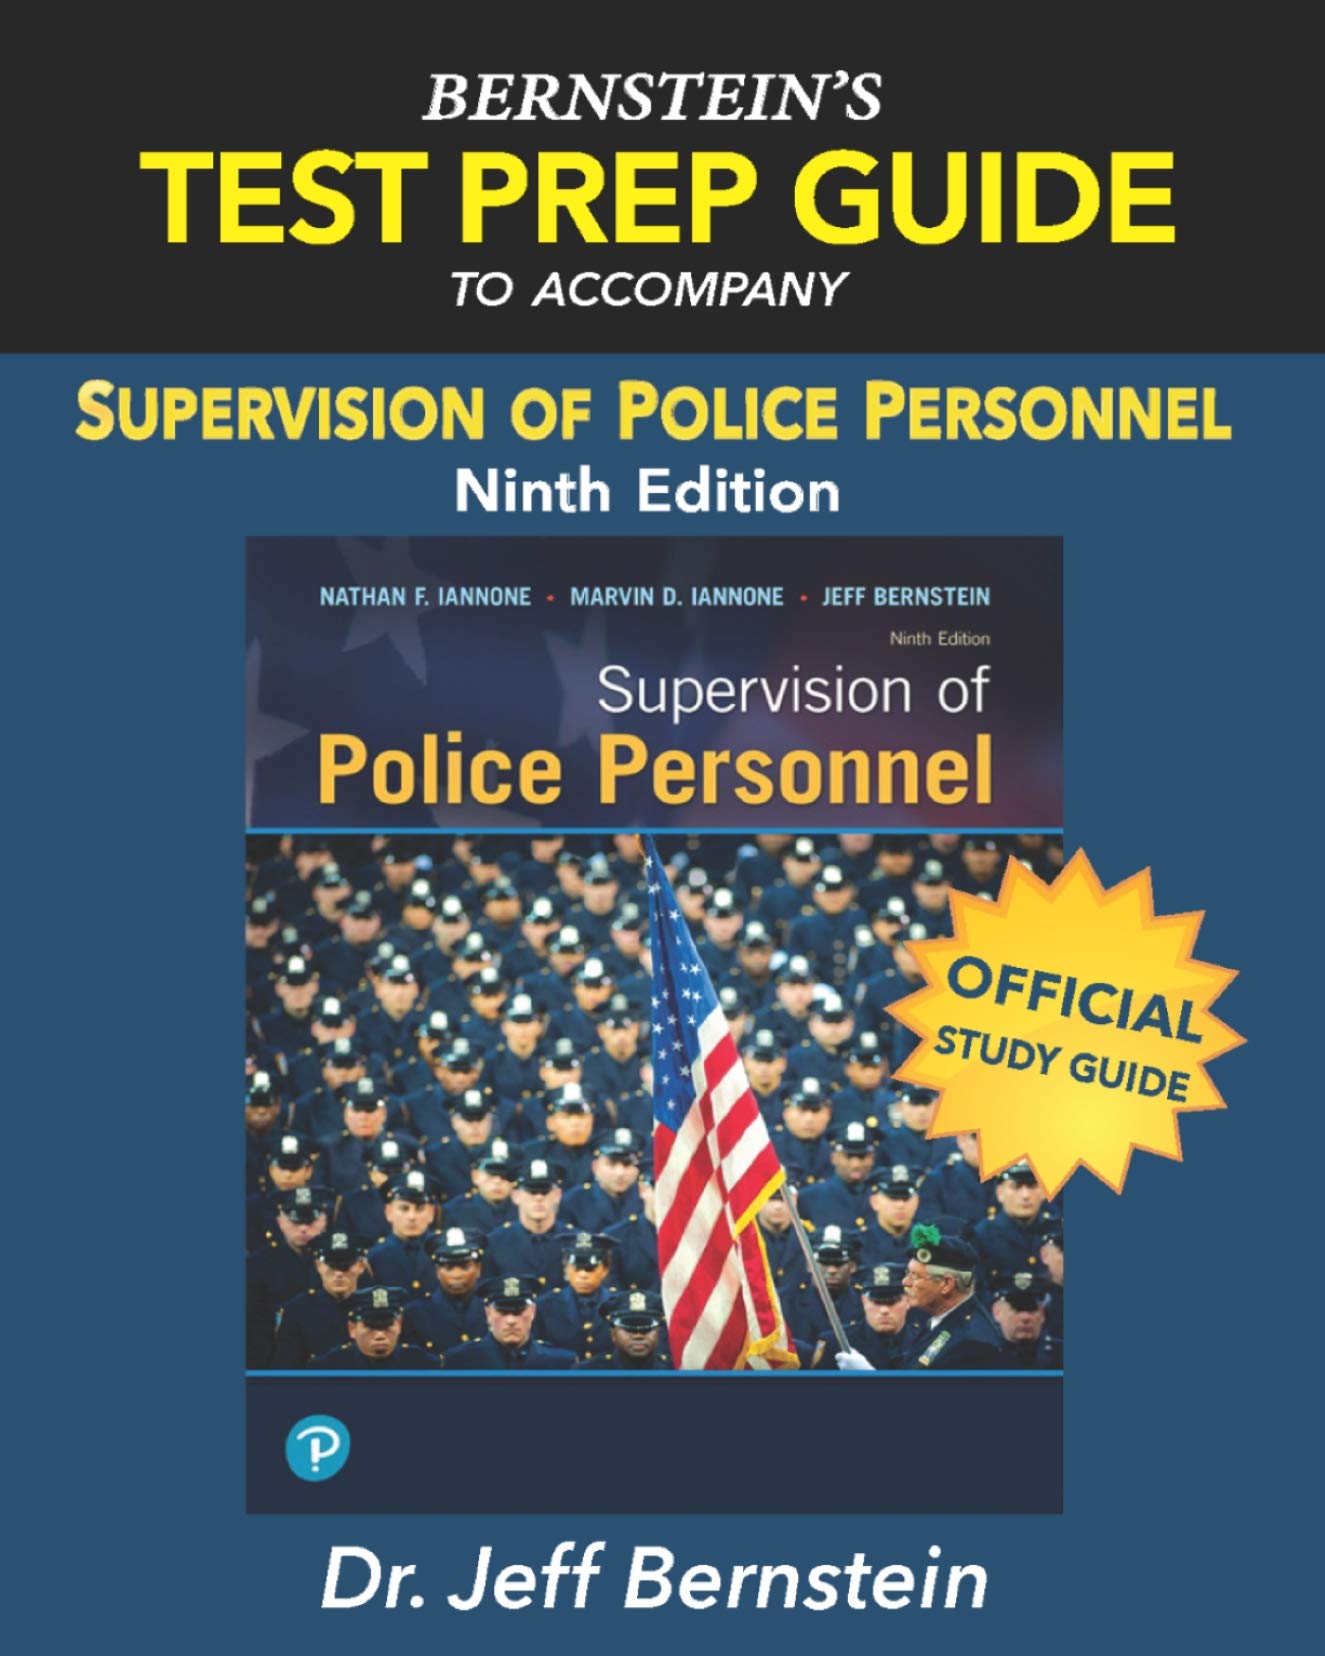 Bernstein Test Prep | Supervision of Police Personnel (9th Edition) Test Prep Study Guide